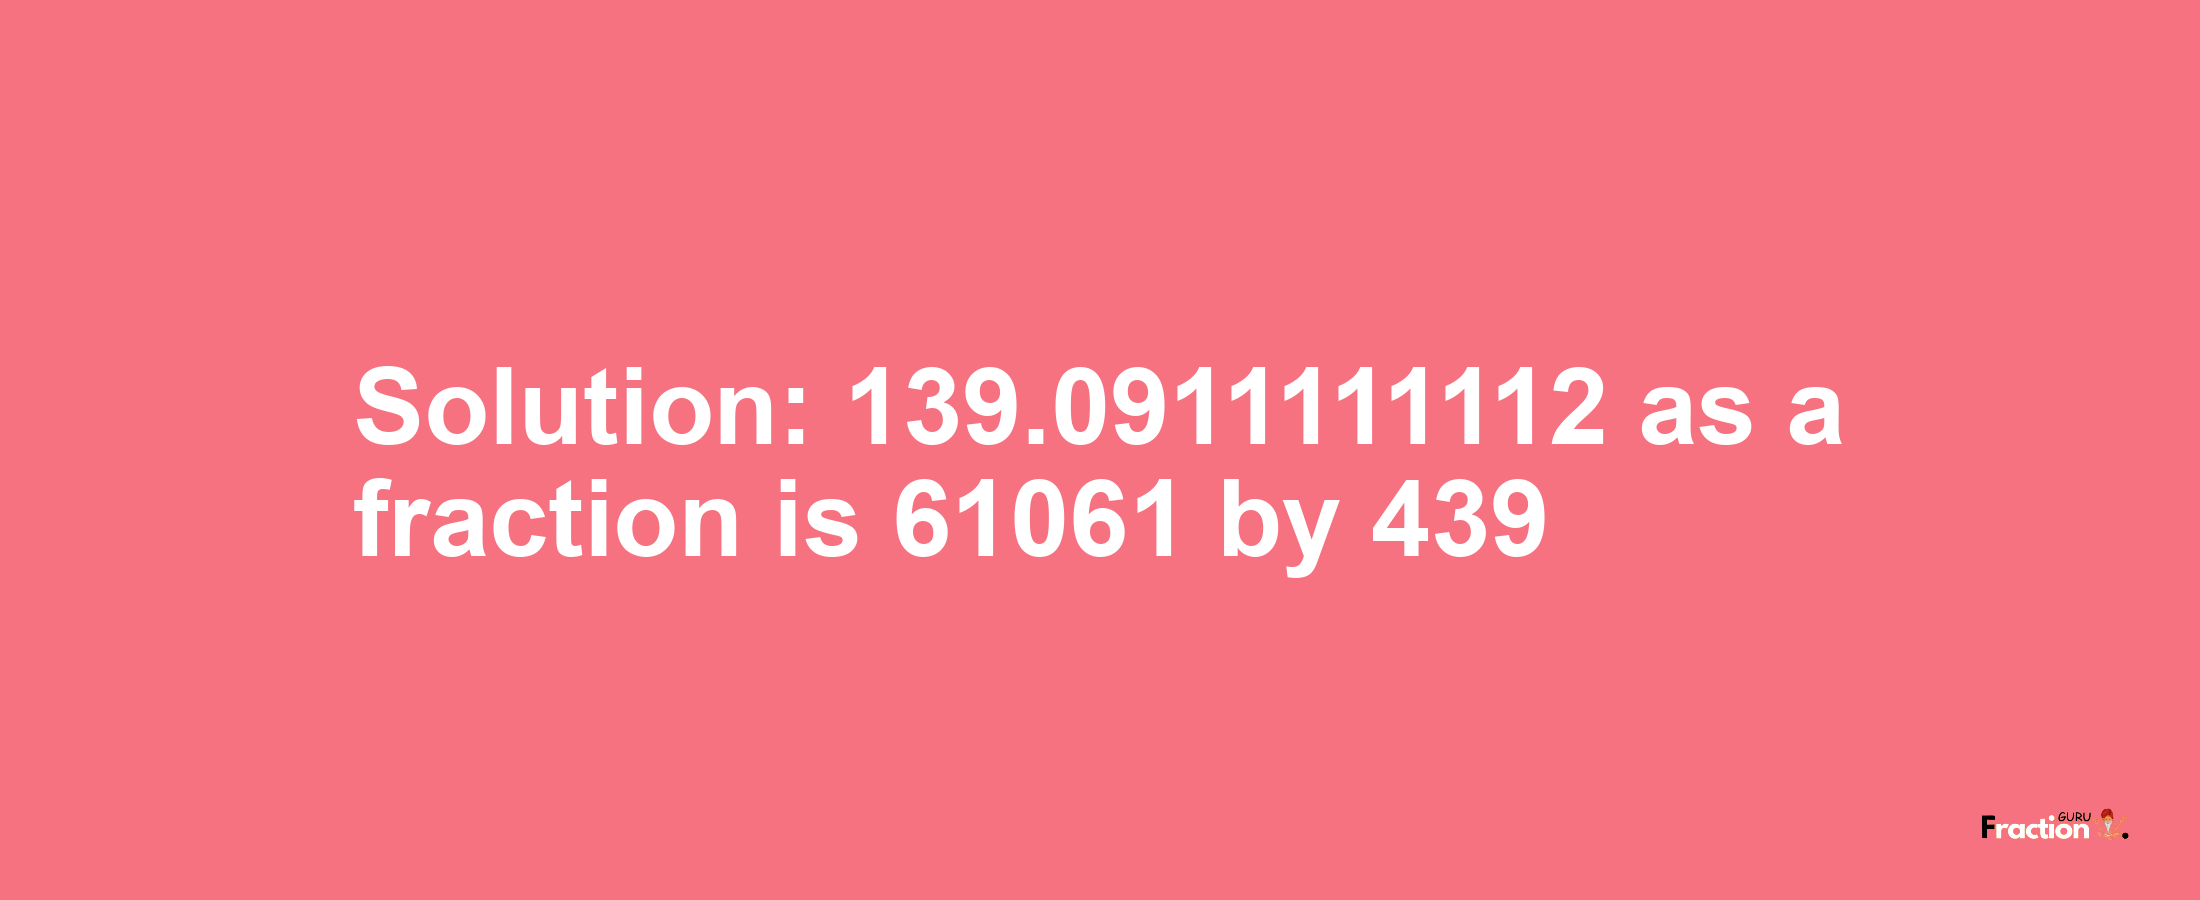 Solution:139.0911111112 as a fraction is 61061/439